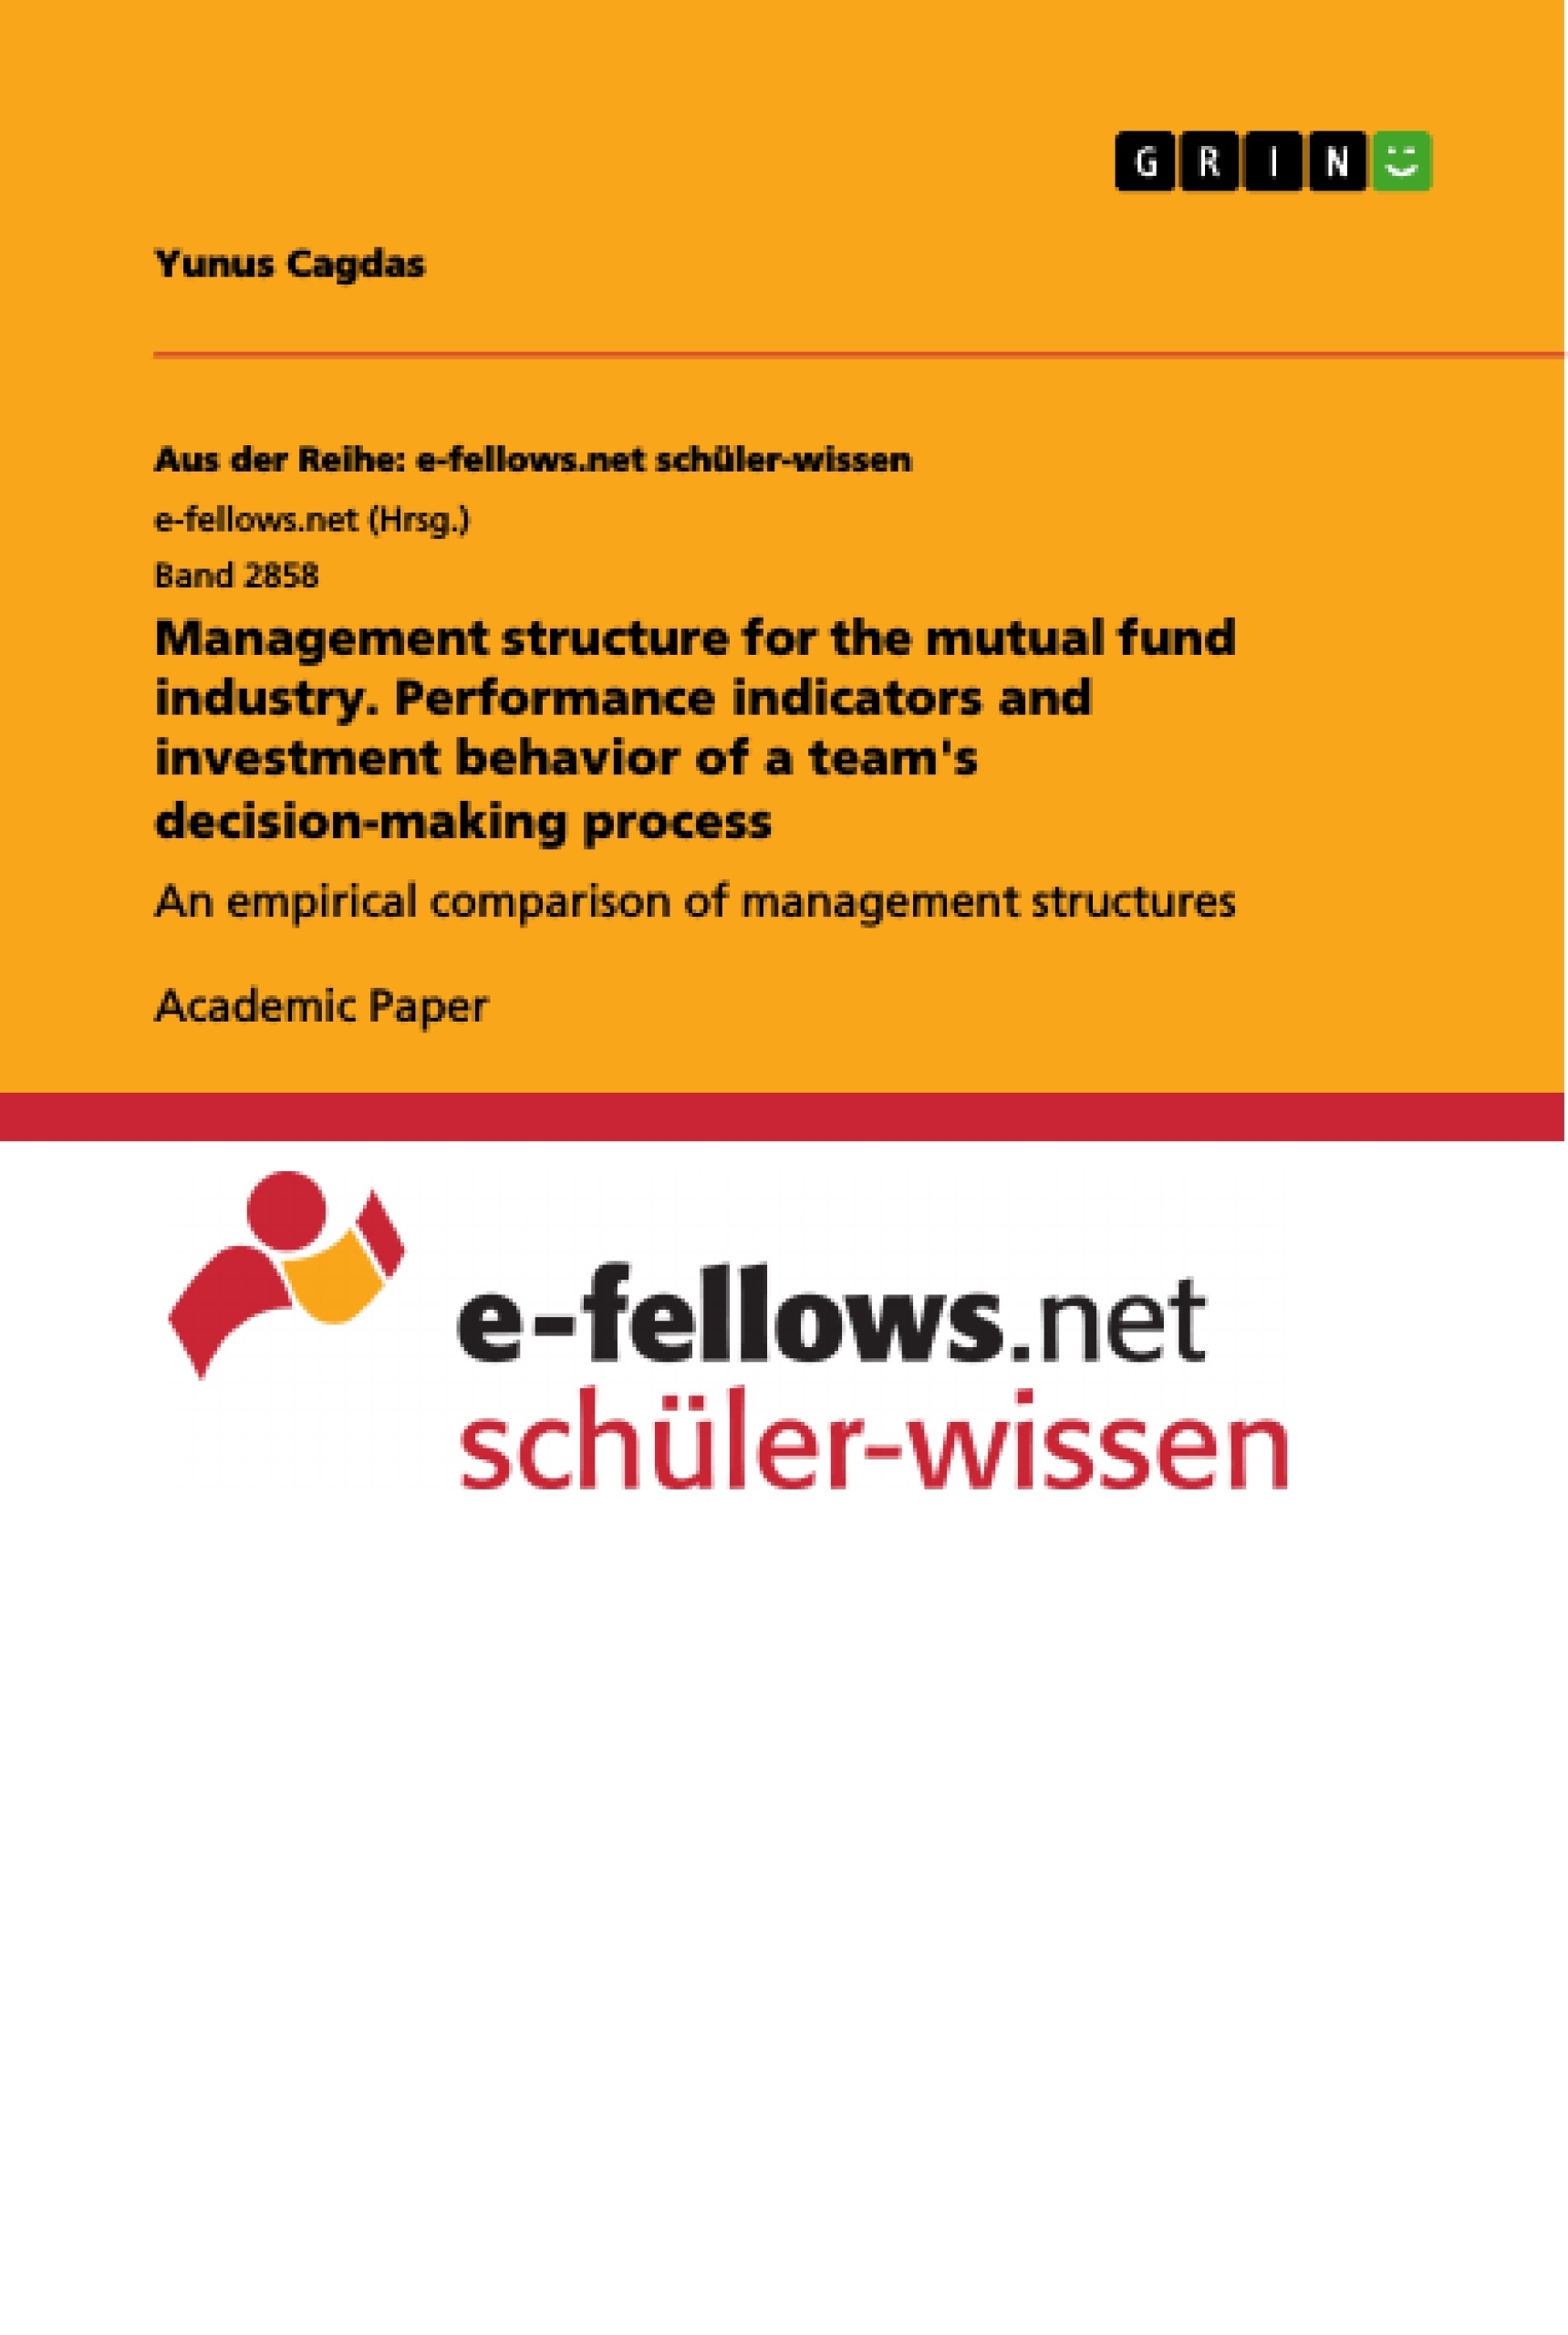 Title: Management structure for the mutual fund industry. Performance indicators and investment behavior of a team's decision-making process